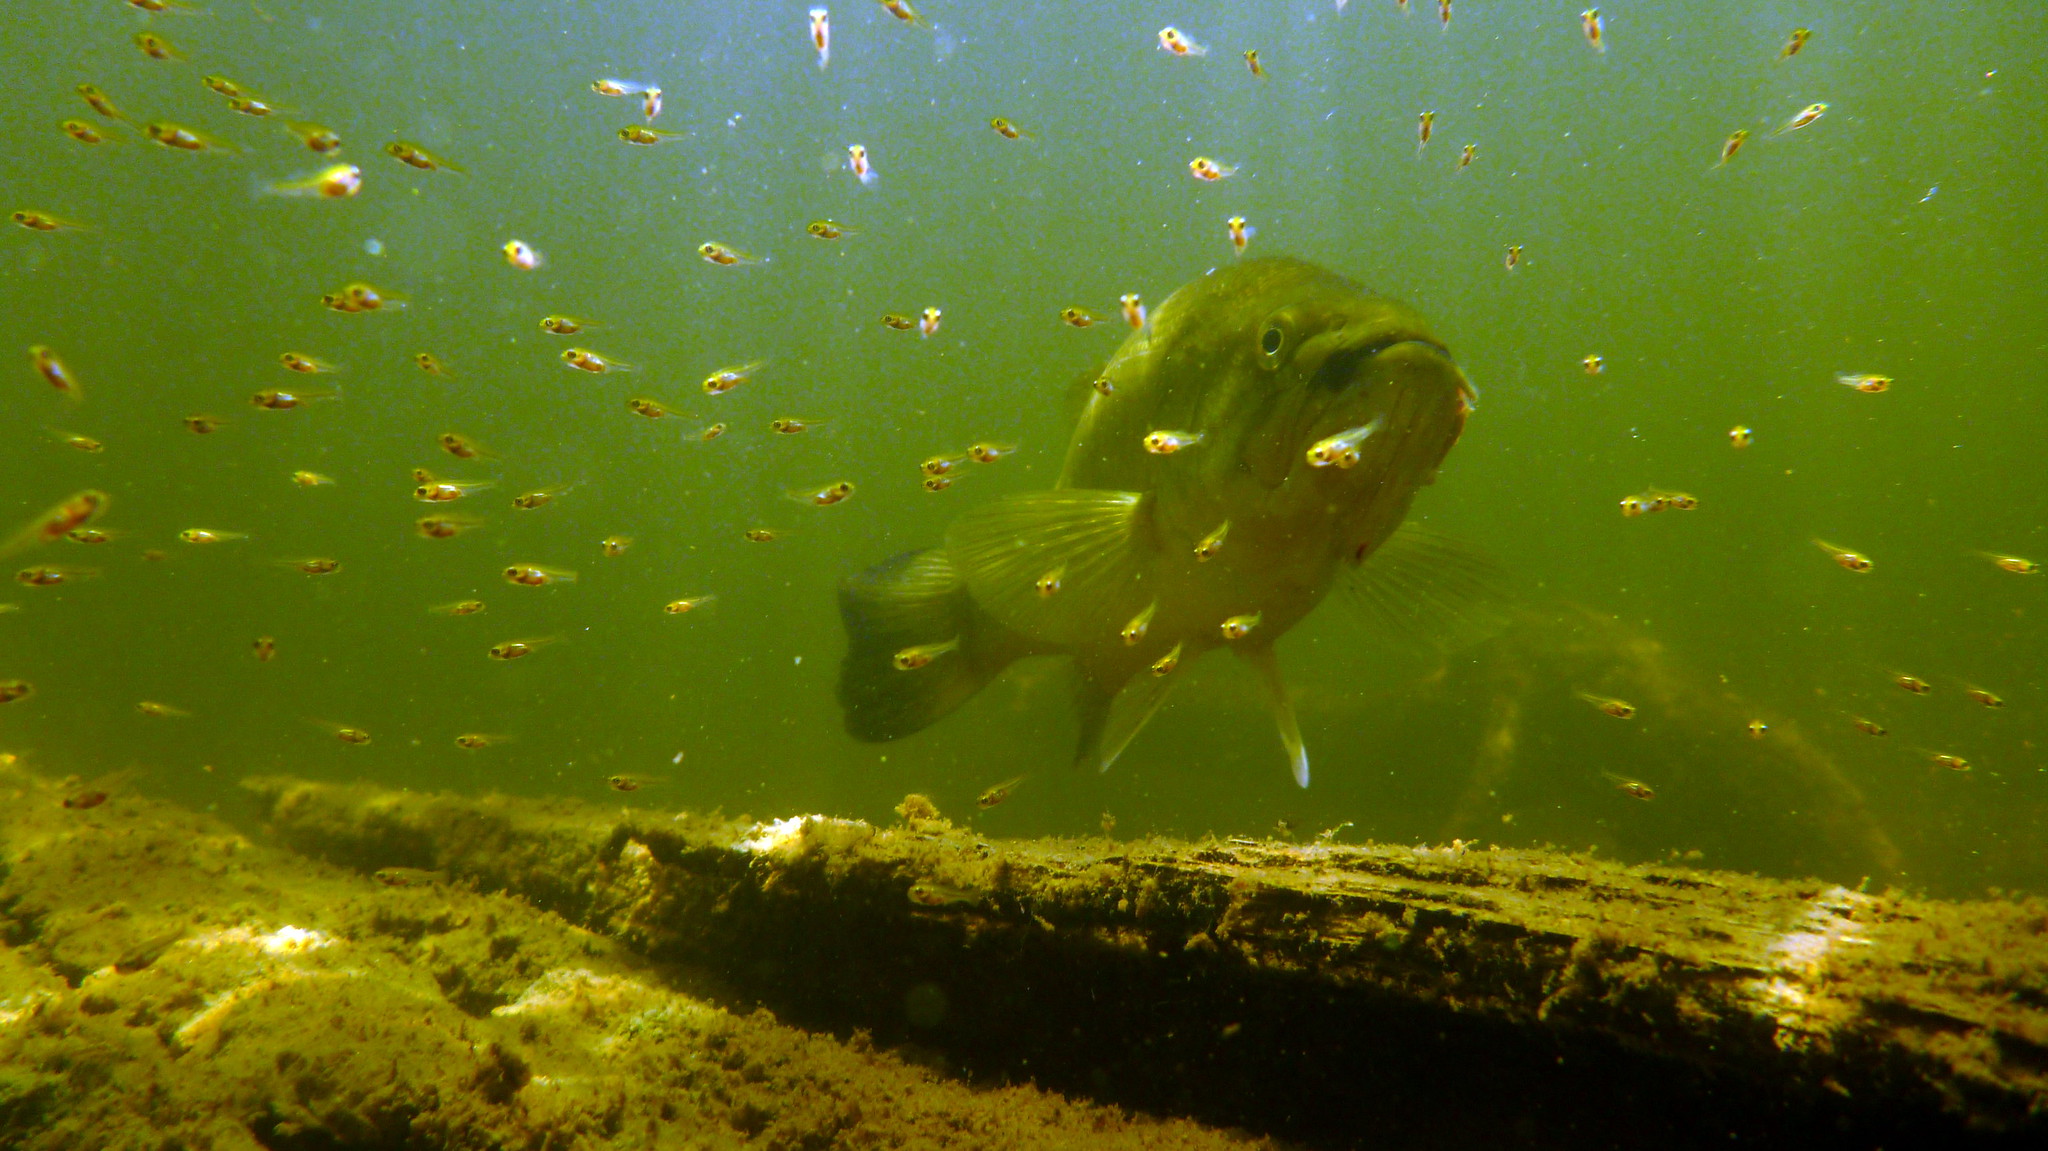 A photo of bass fry underwater.